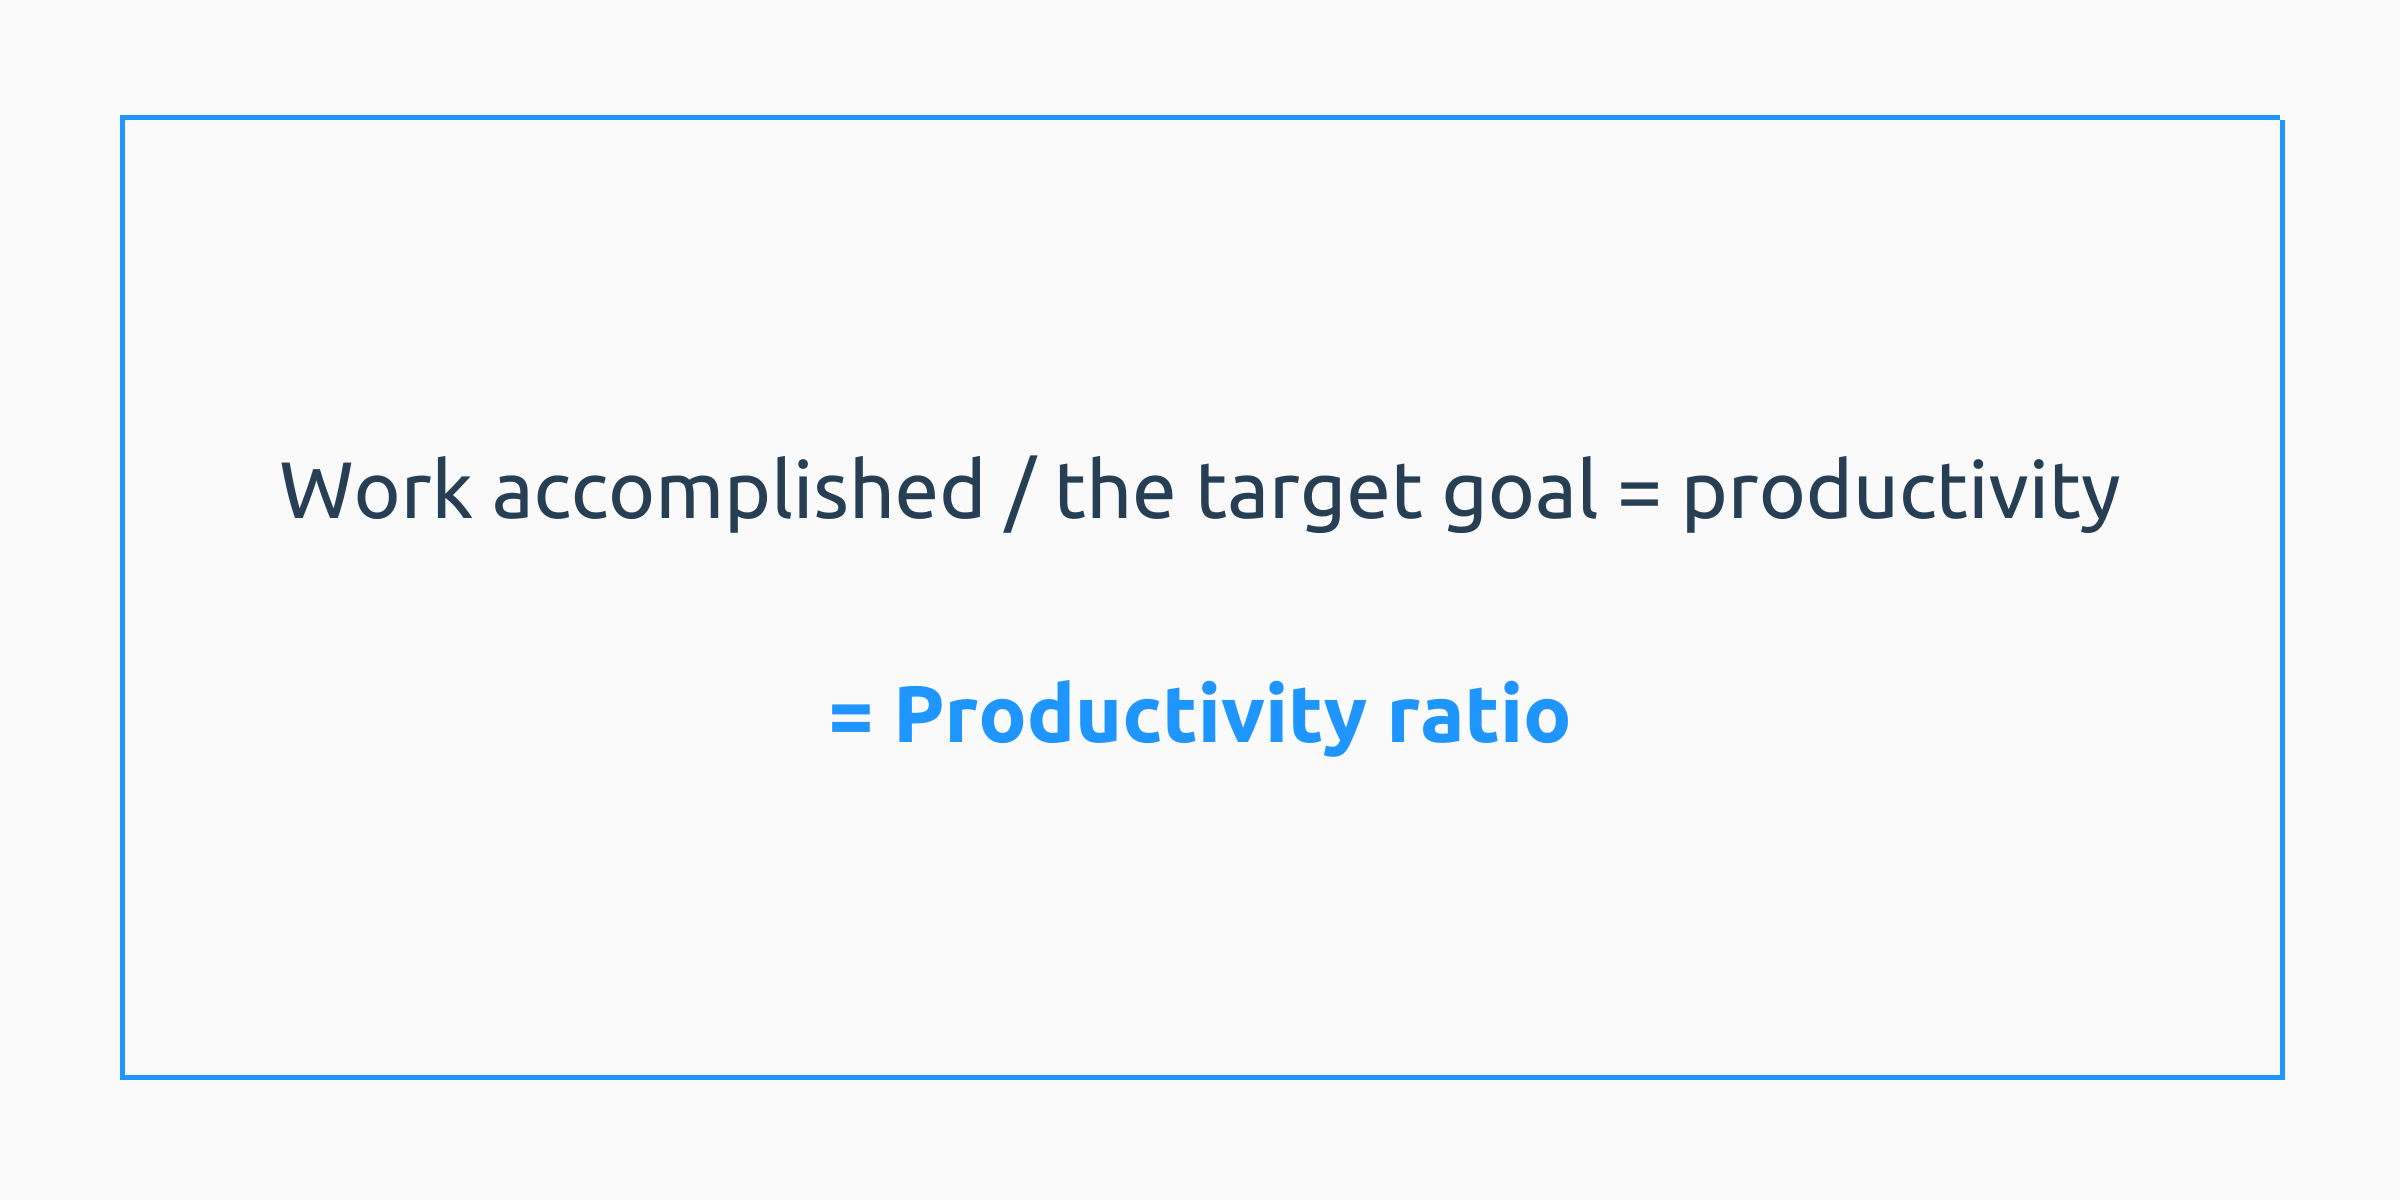 The productivity ratio is: 

Work accomplished / the target goal = productivity